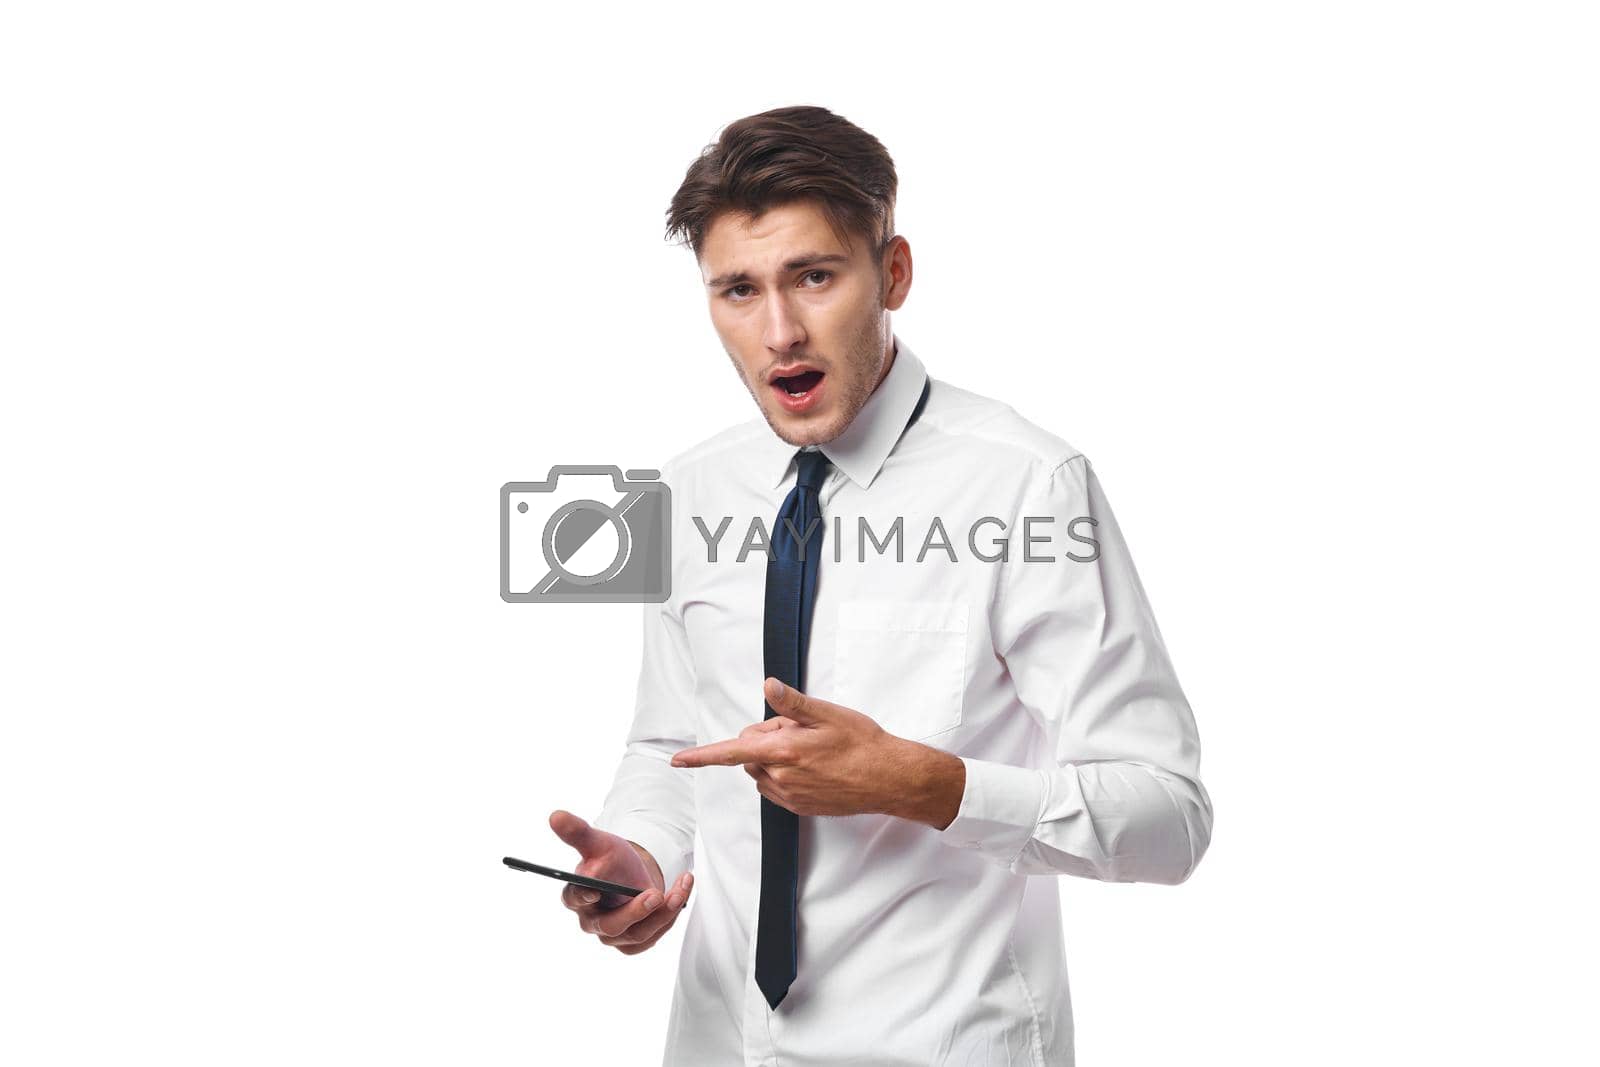 man phone communication success work office isolated background. High quality photo